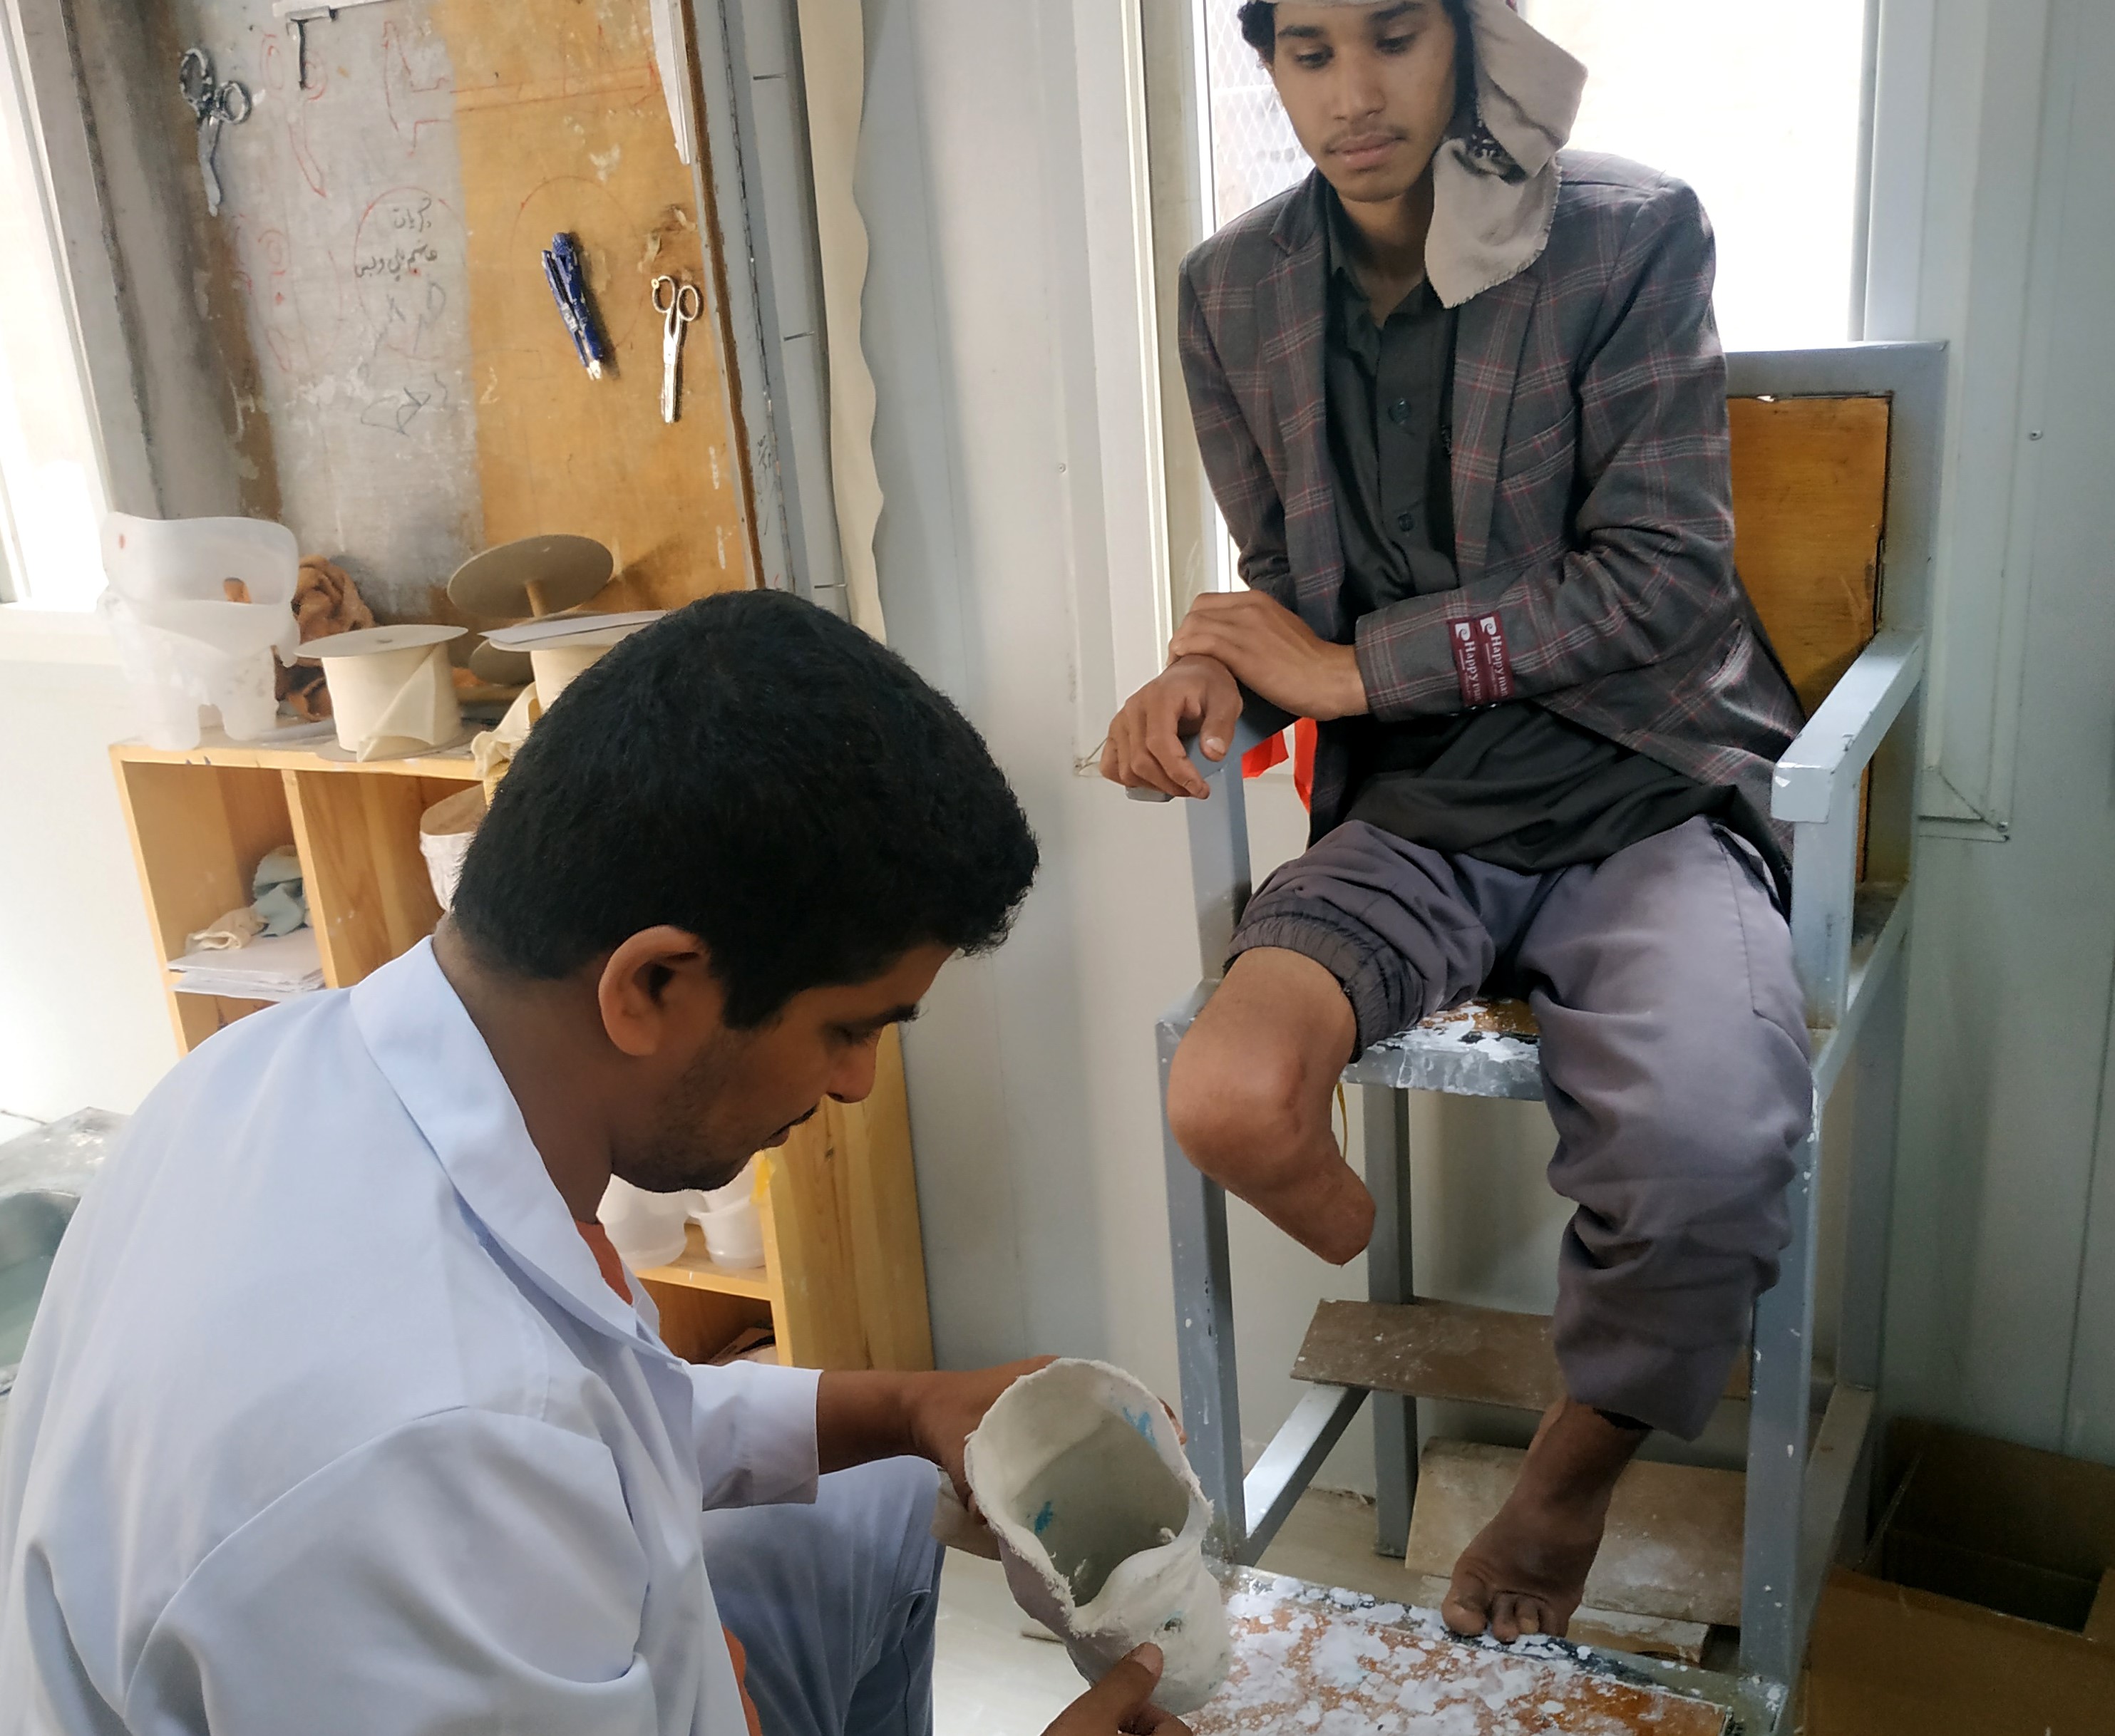 Teenage boy with amputated leg sitting in a chair. Prosthetic technician kneels in front of the boy, holding a prosthetic leg 